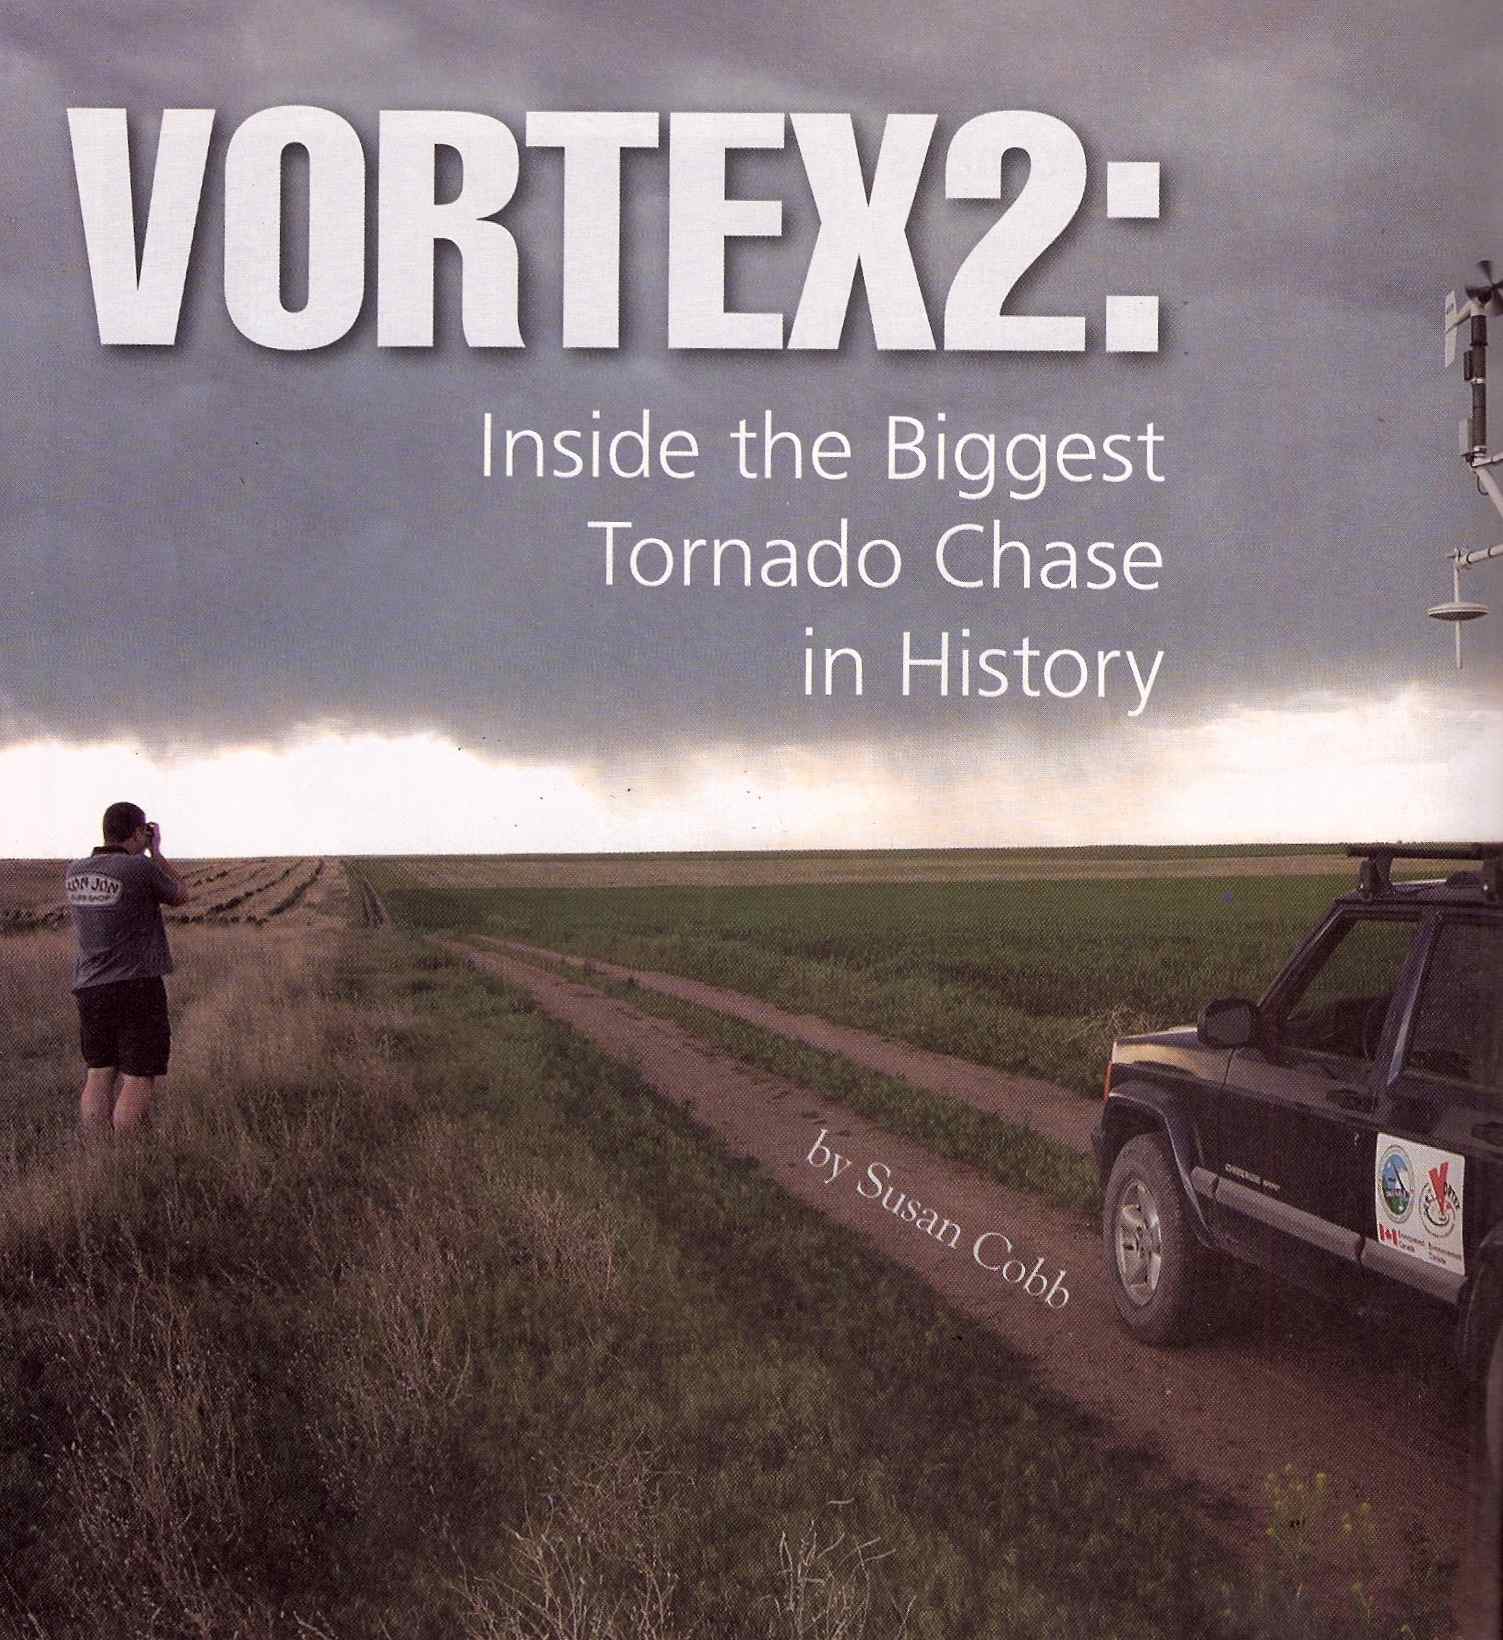 VORTEX2 article published in Weatherwise